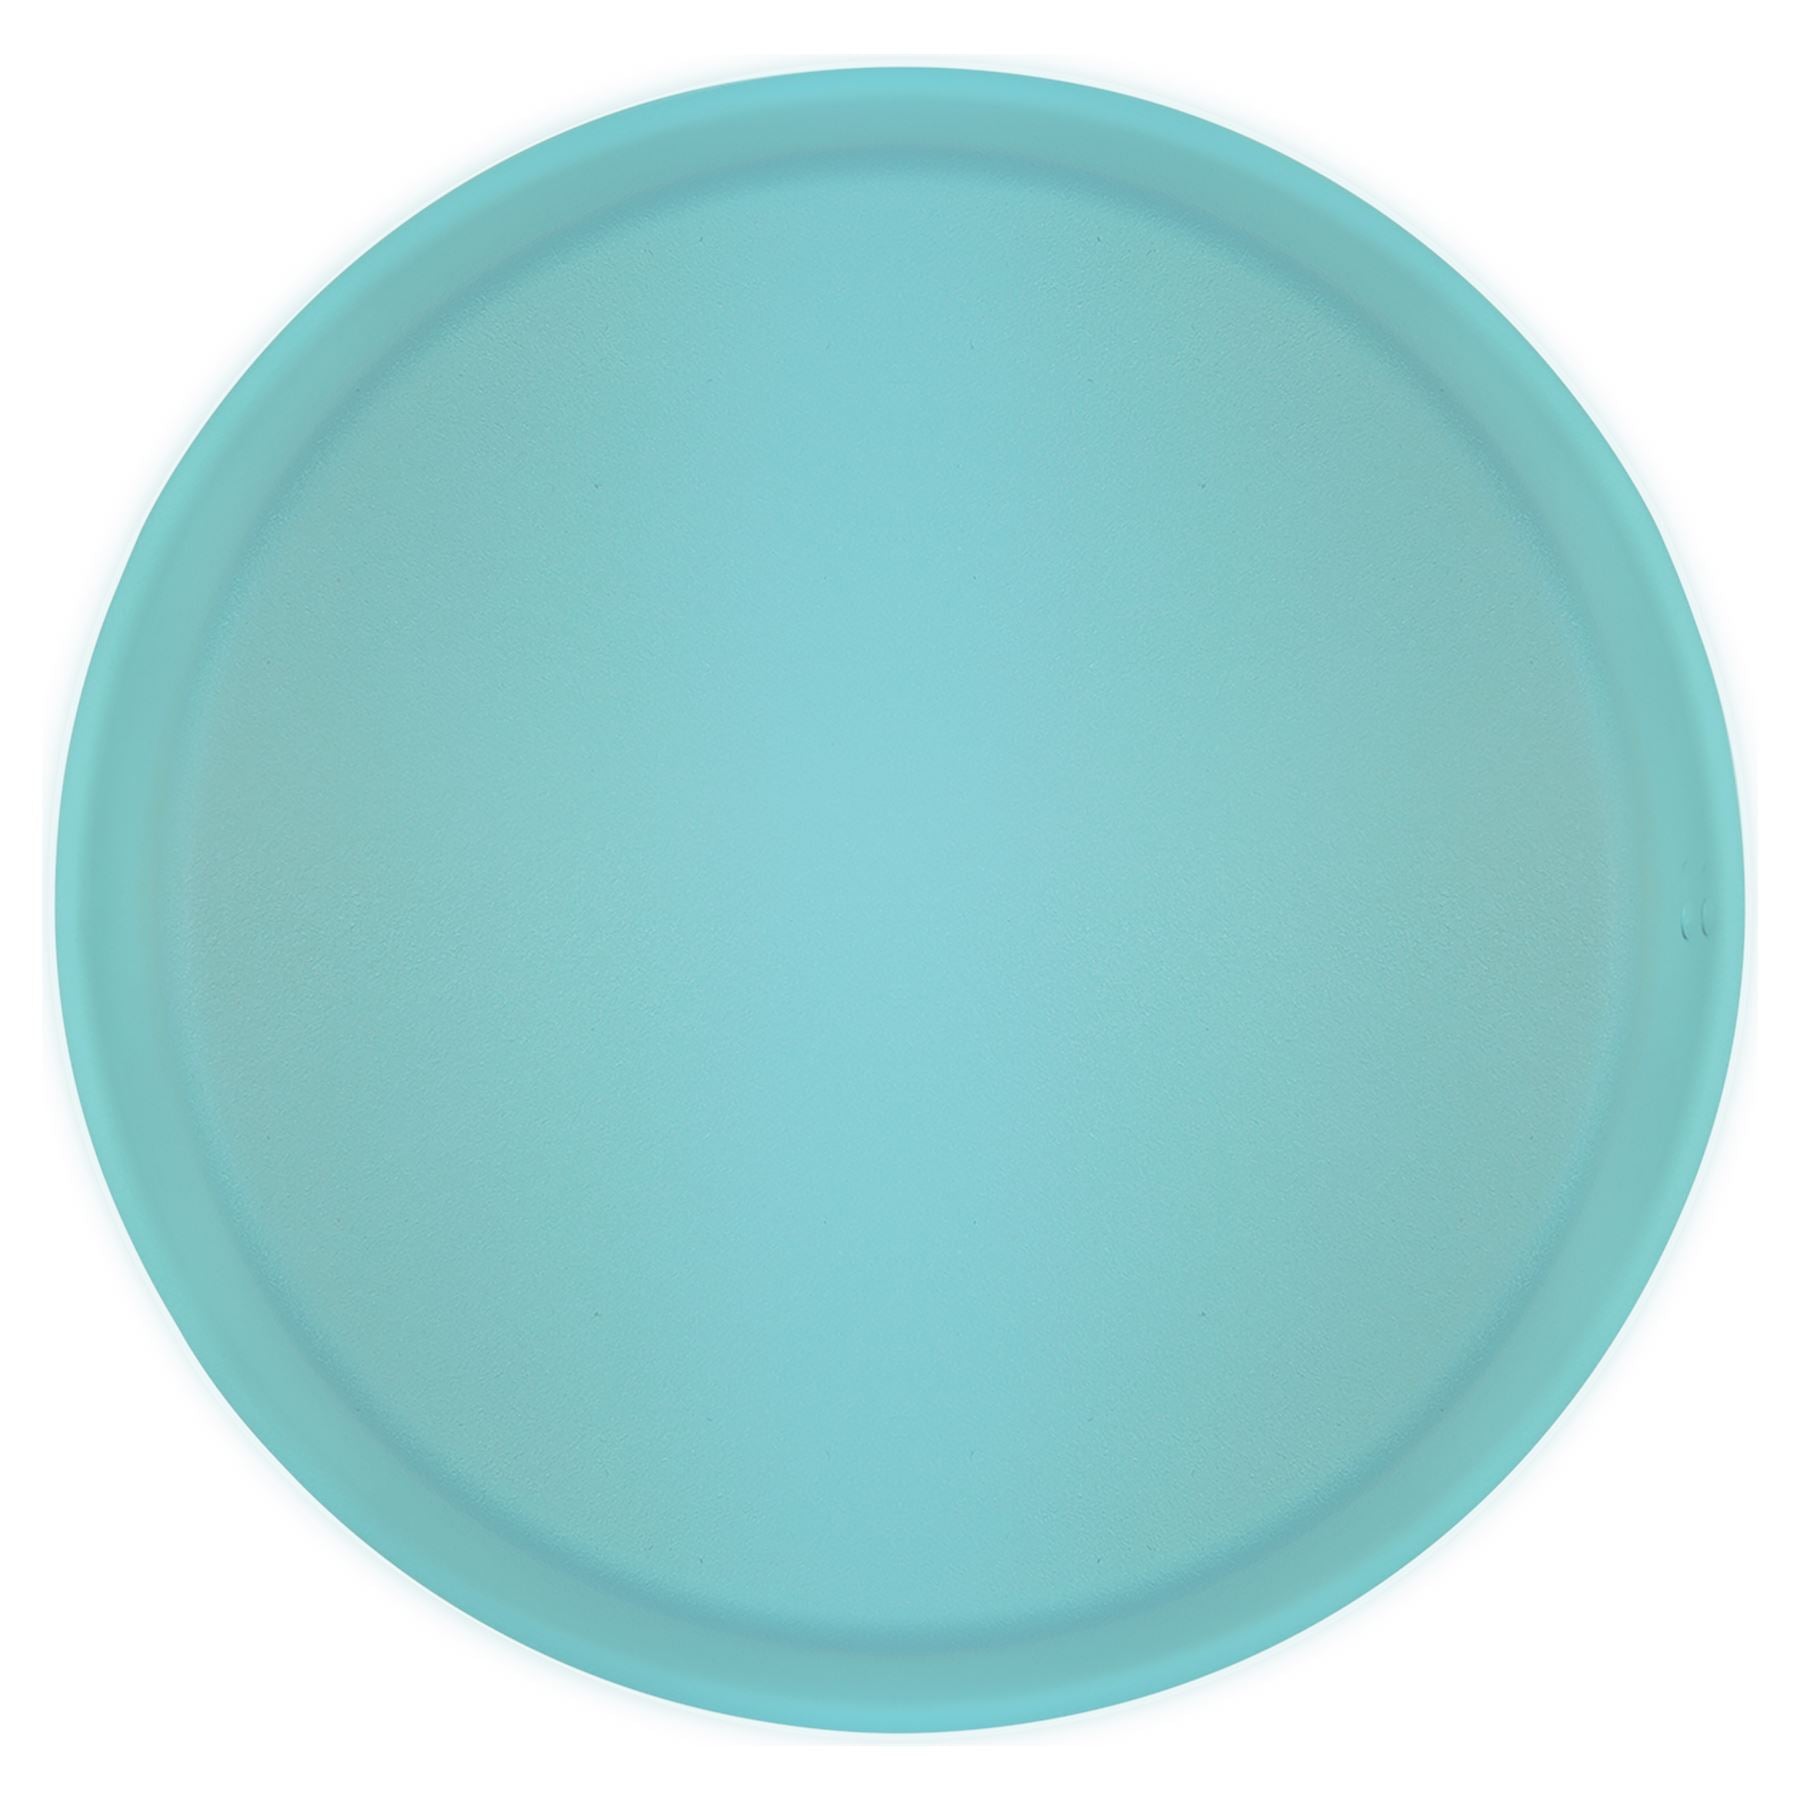 9" Aluminum Pie Pan w/Lid, Laser Engraved Cake Pan Craftworks NW Replacement Lid Only Teal Small